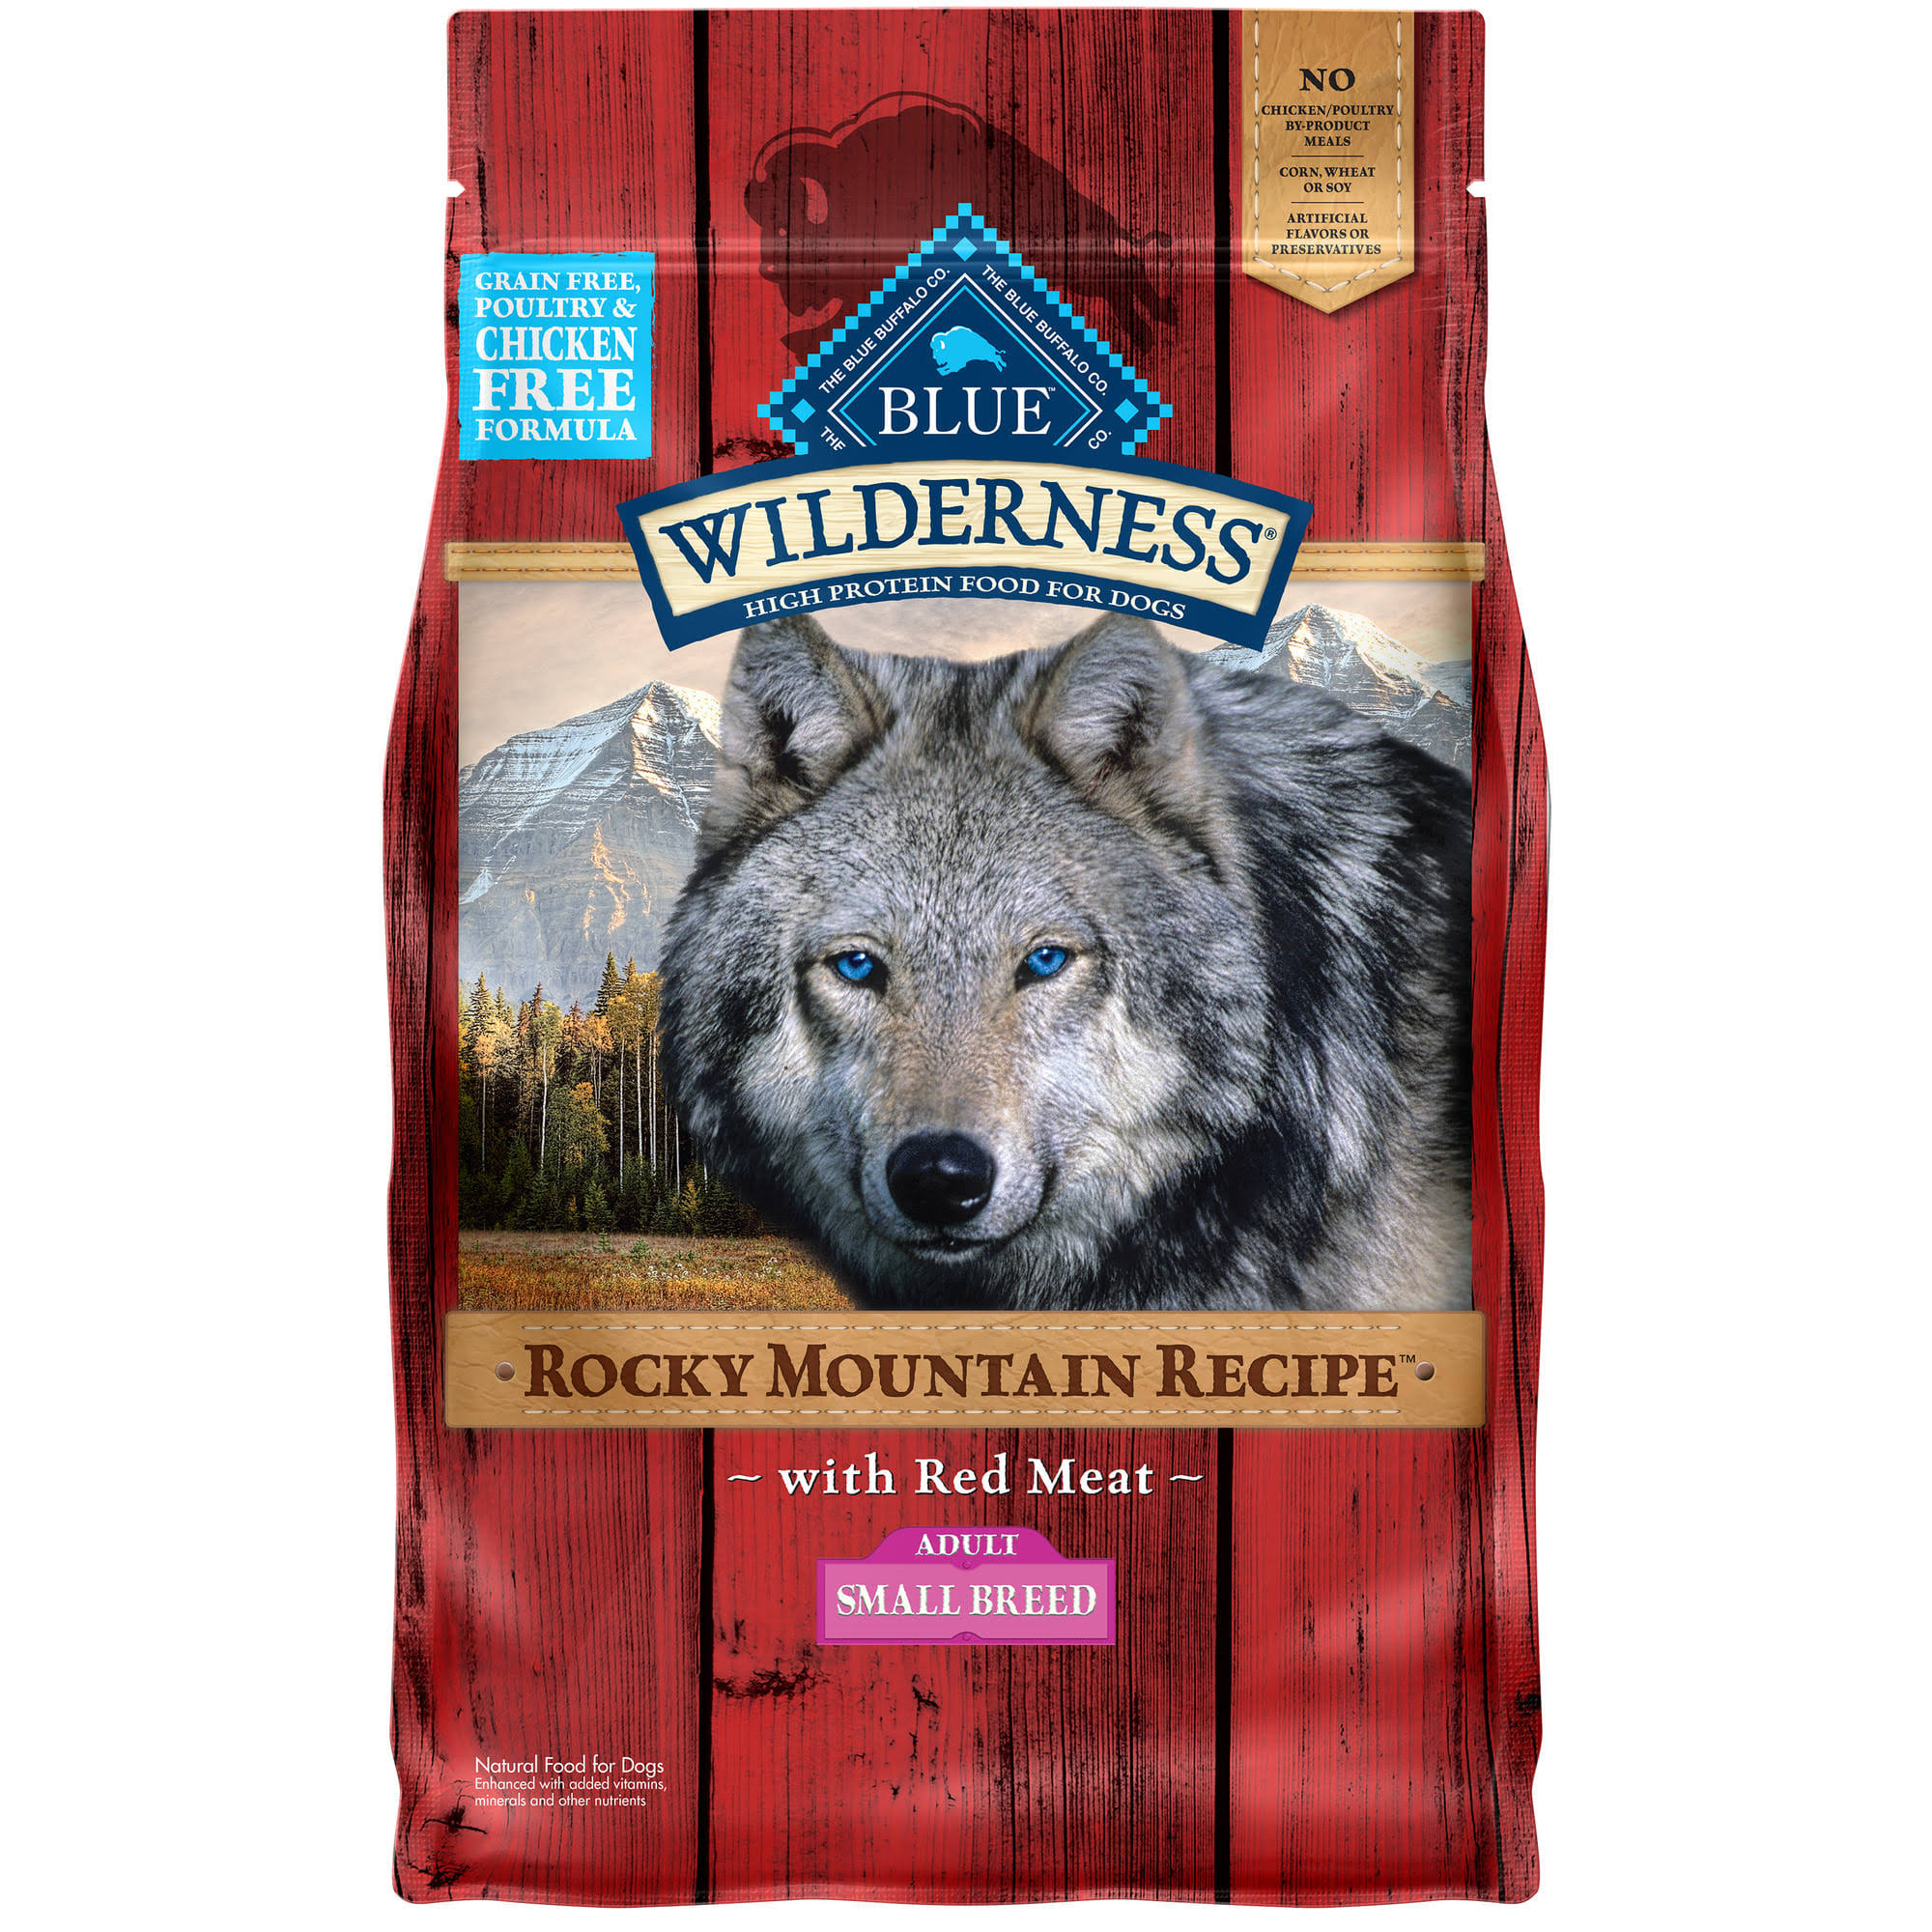 Blue Buffalo Wilderness Rocky Mountain Recipe Dog Food - Red Meat, Small Breed